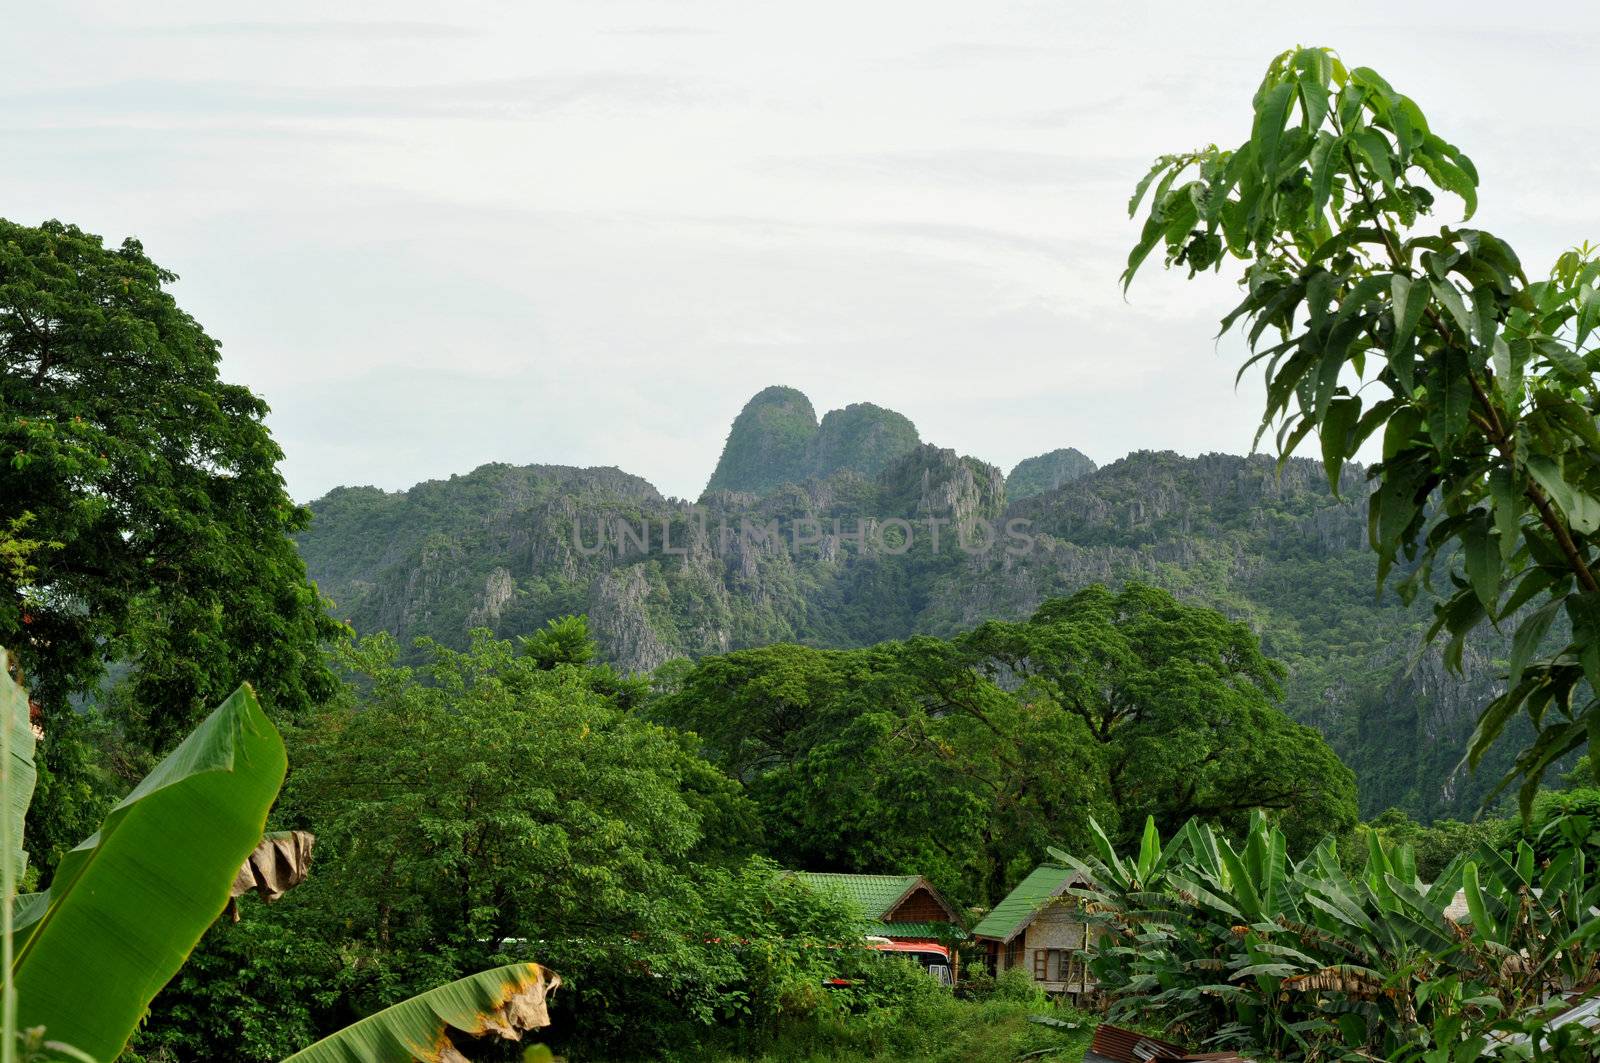 the beautiful landscape of vang vieng,laos
Traditional Thai art/paintings in an ancient temple,thailand